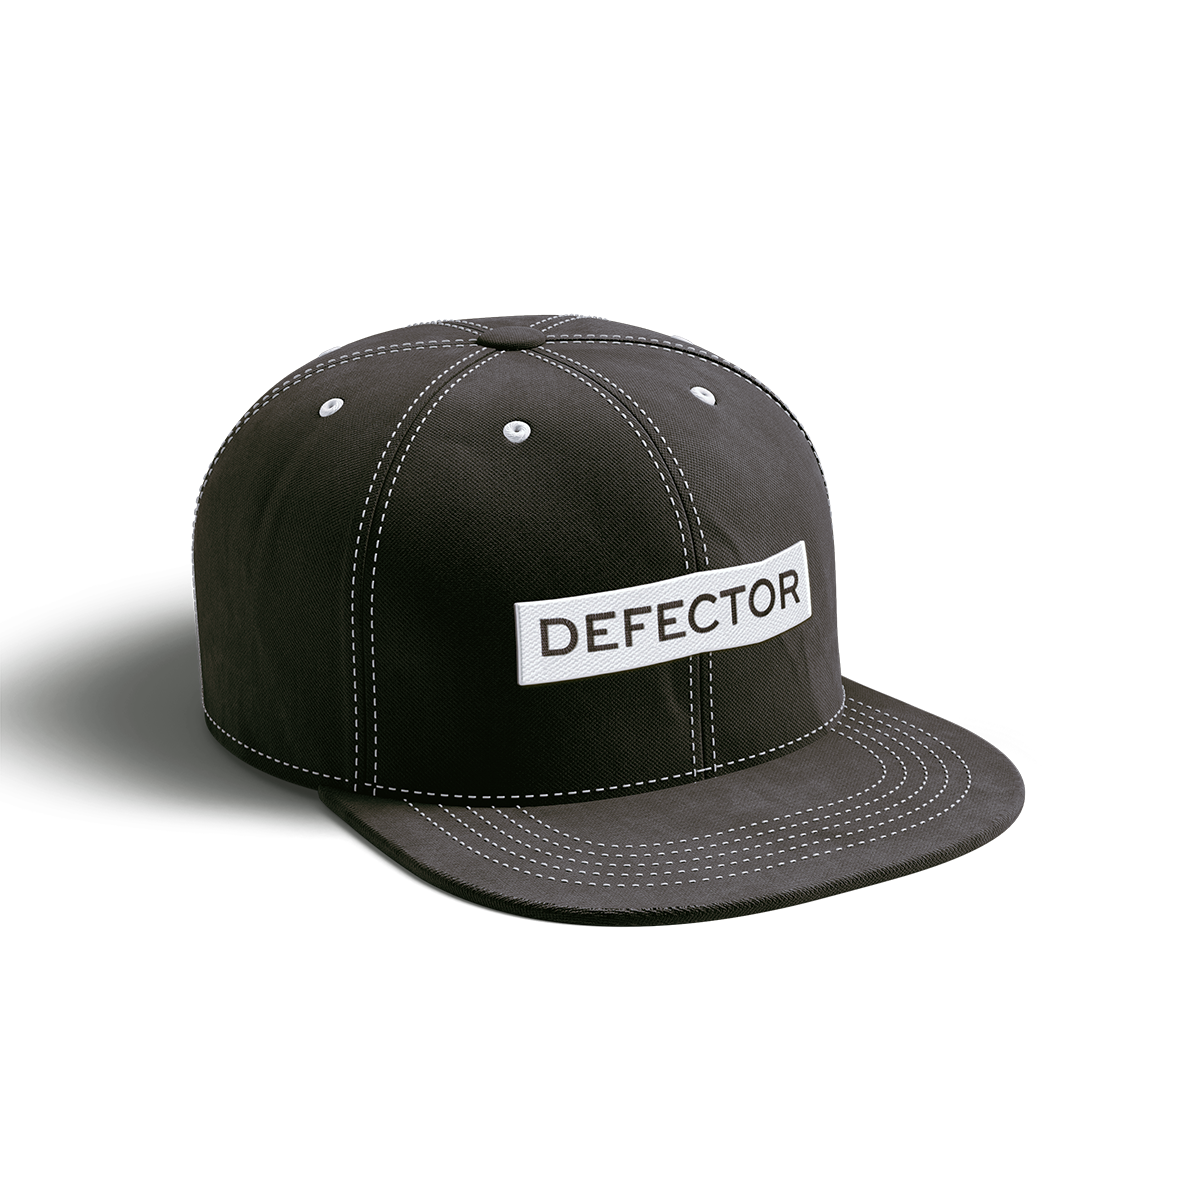 This is a black baseball cap with white stitching. It features a three-inch wide "DEFECTOR" logo stitched, white logo with black text.